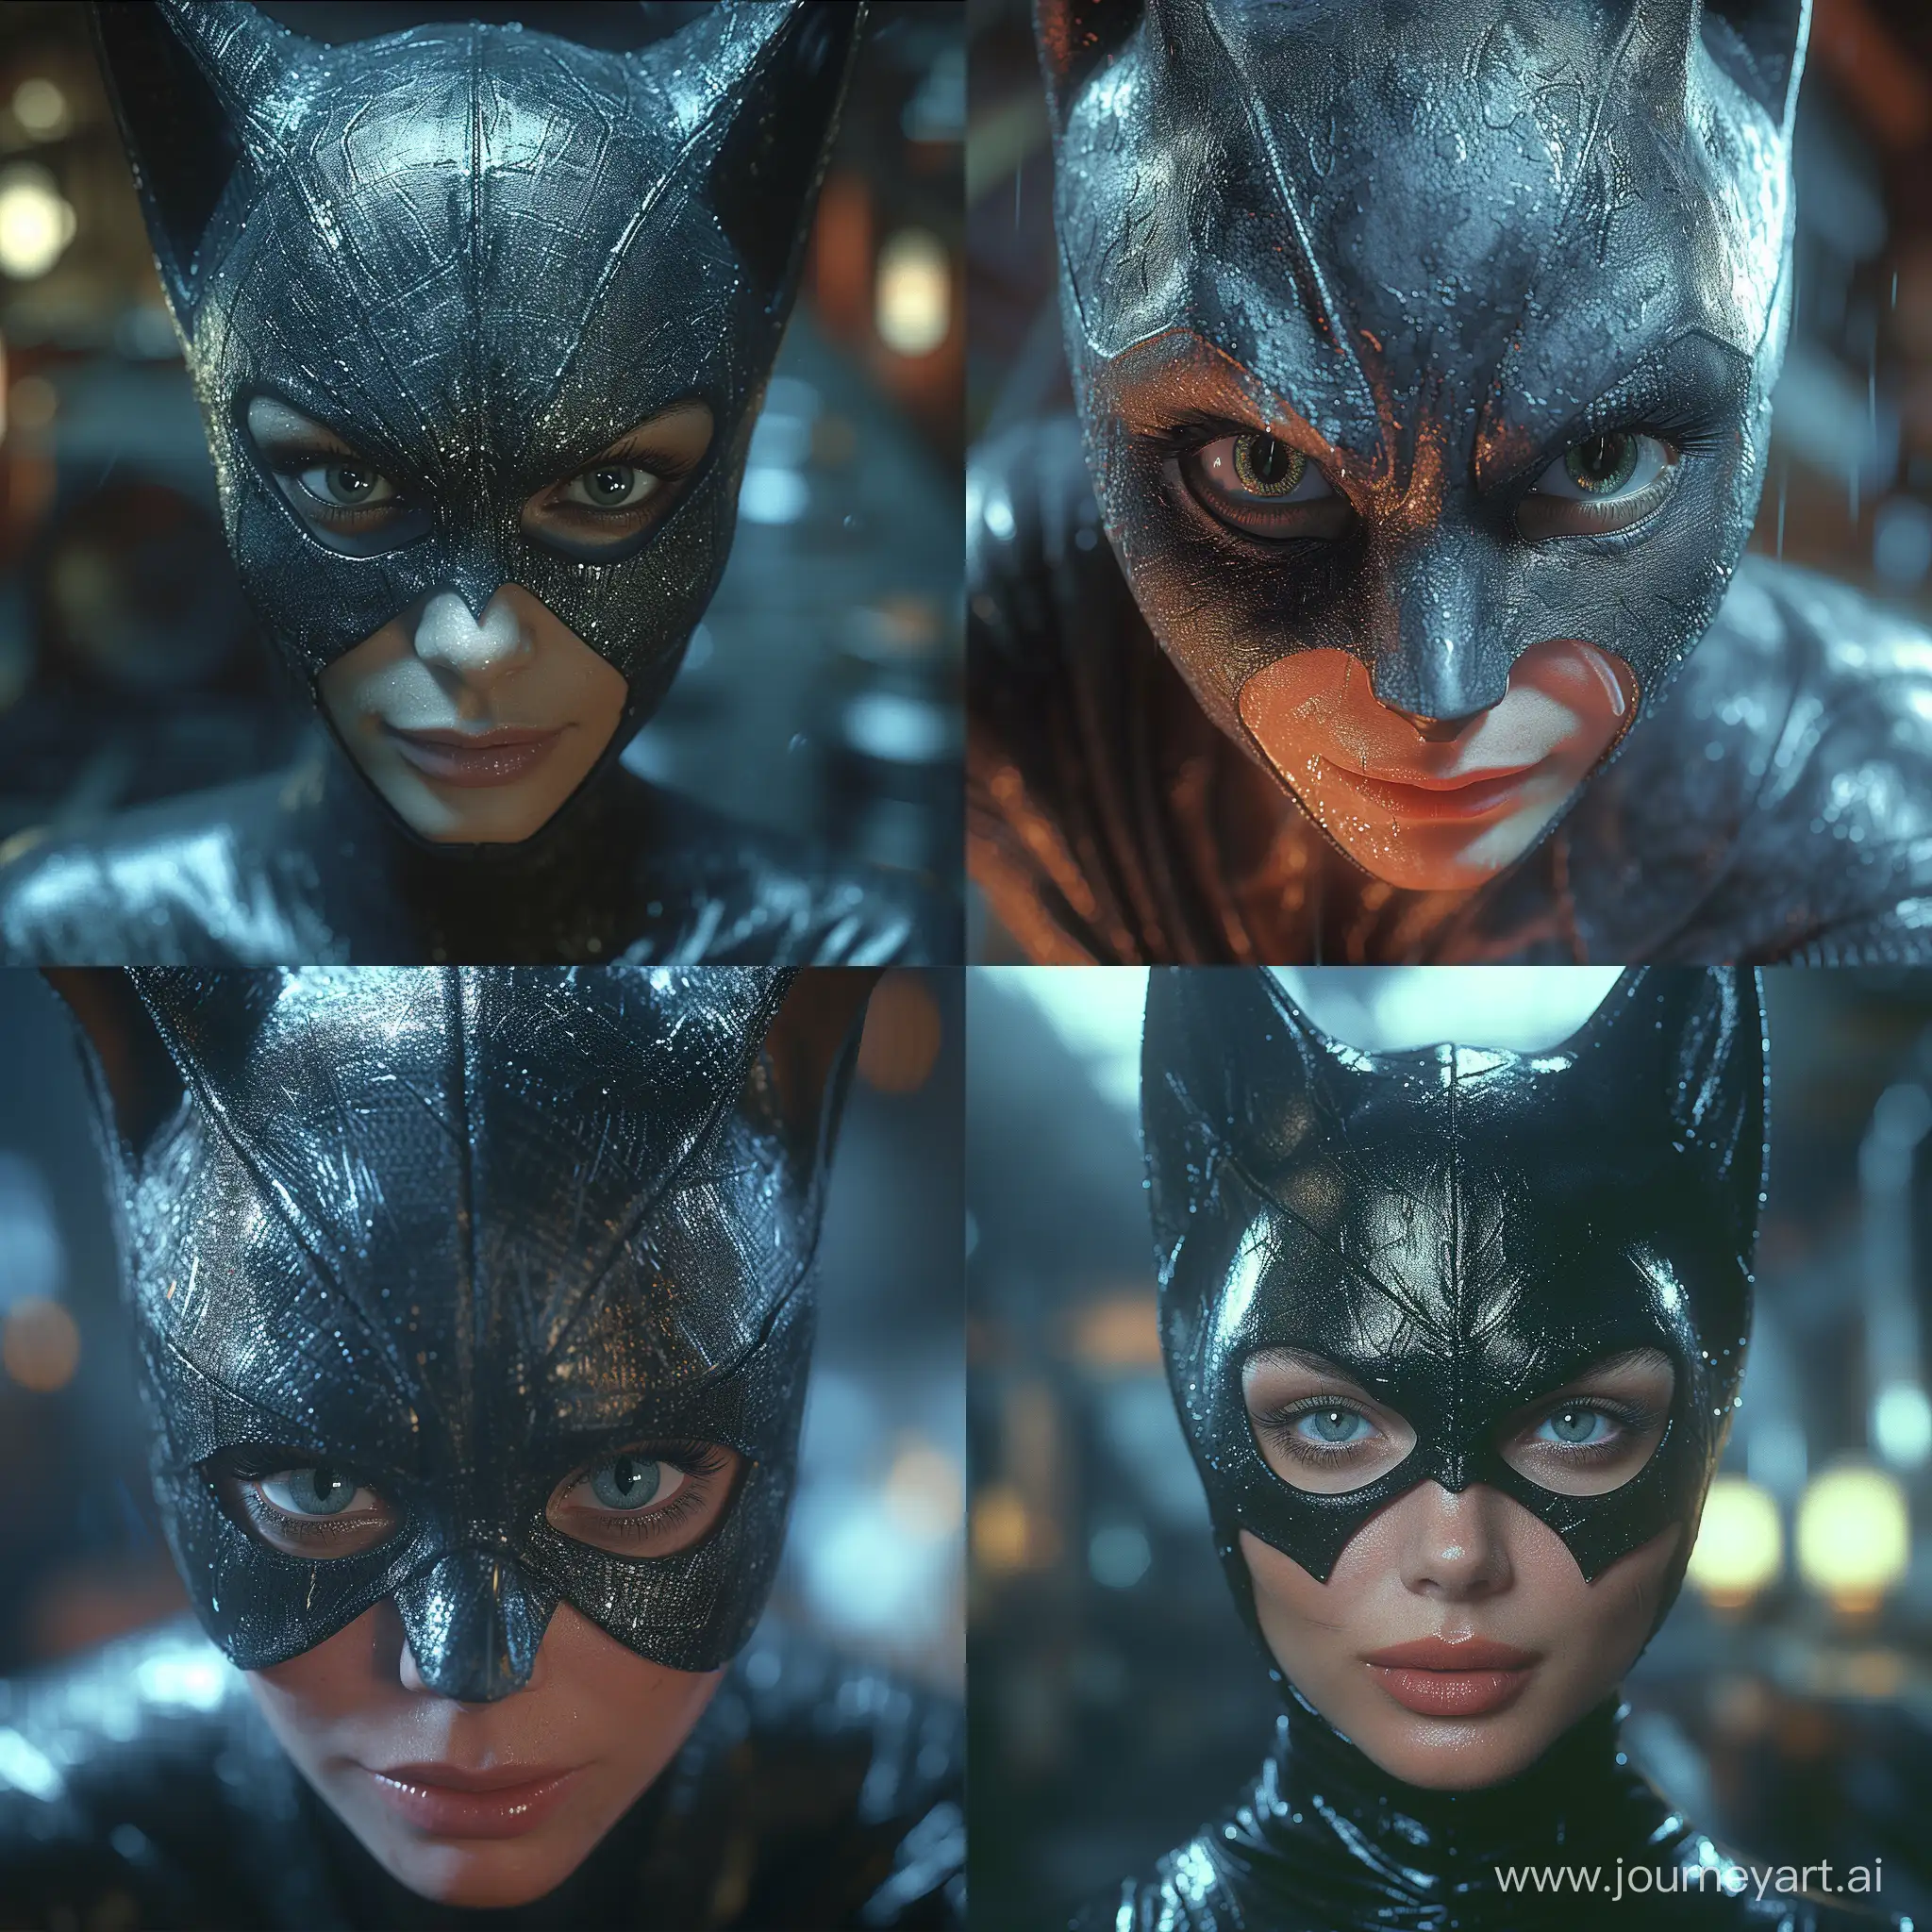 Intense-Catwoman-1989-Costume-CloseUp-Ready-to-Face-Danger